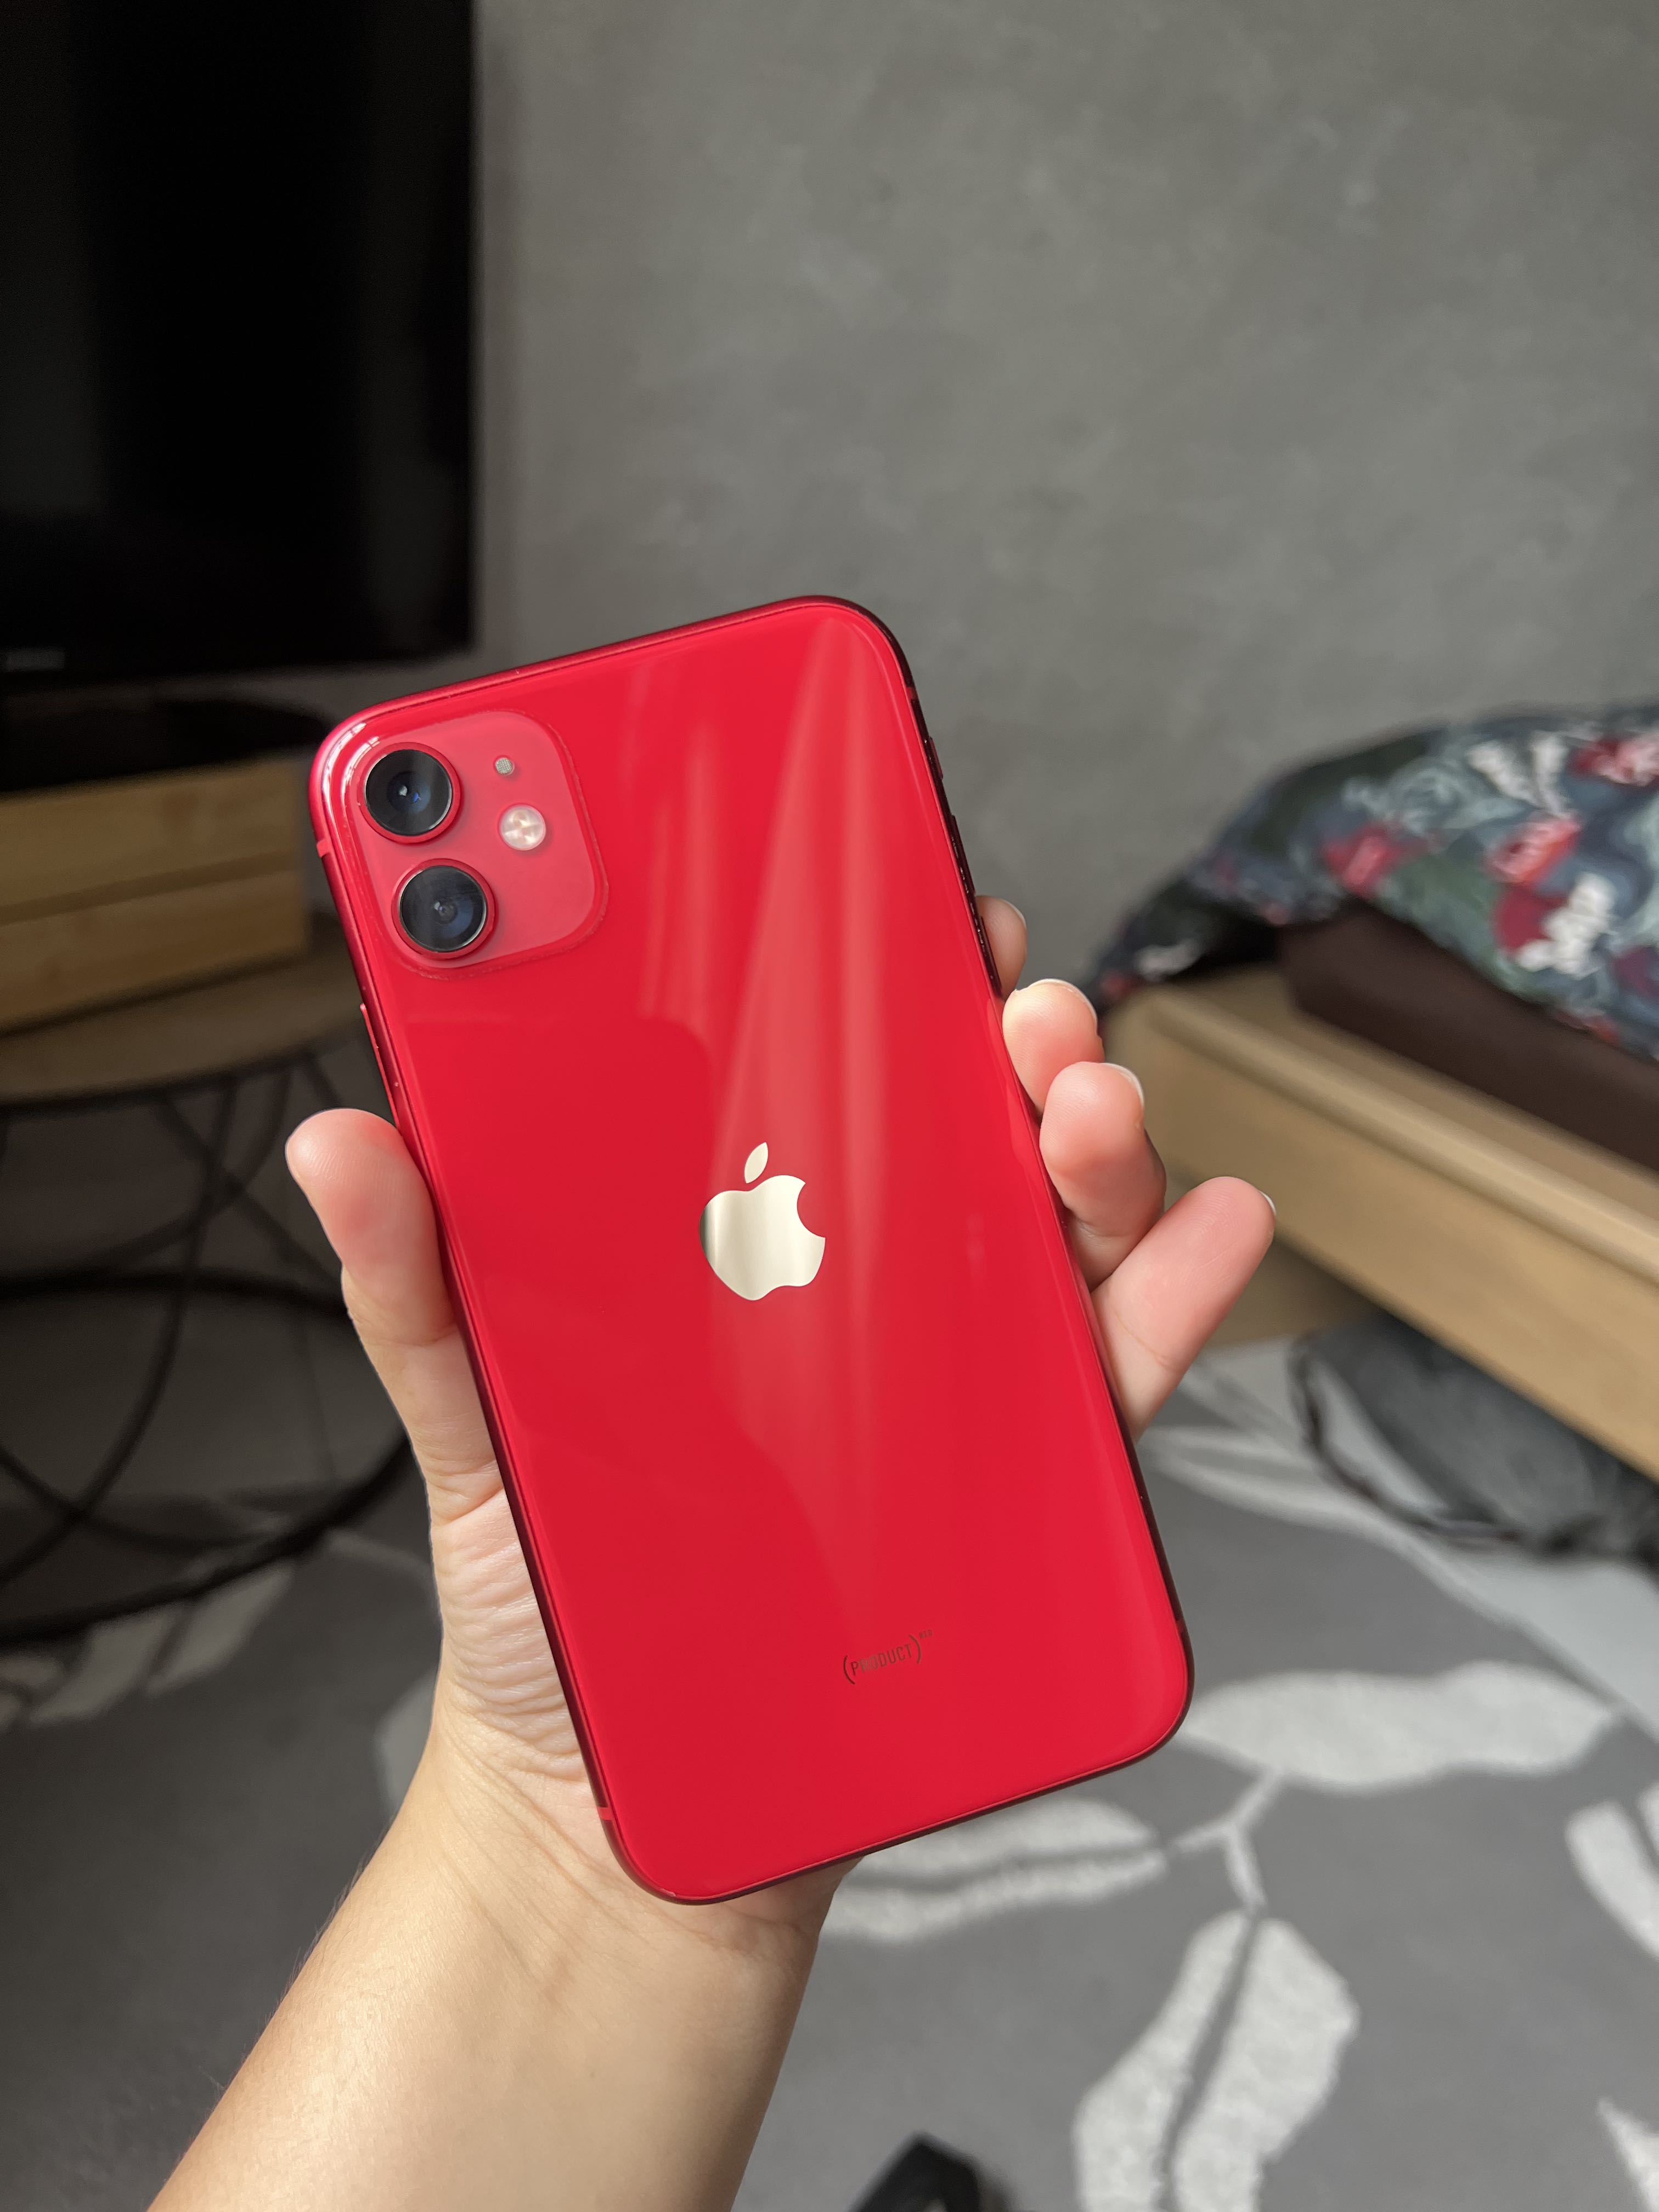 IPhone 11 Product Red Condition 10/10, Mobile Phones  Gadgets, Mobile  Phones, iPhone, iPhone 11 Series on Carousell